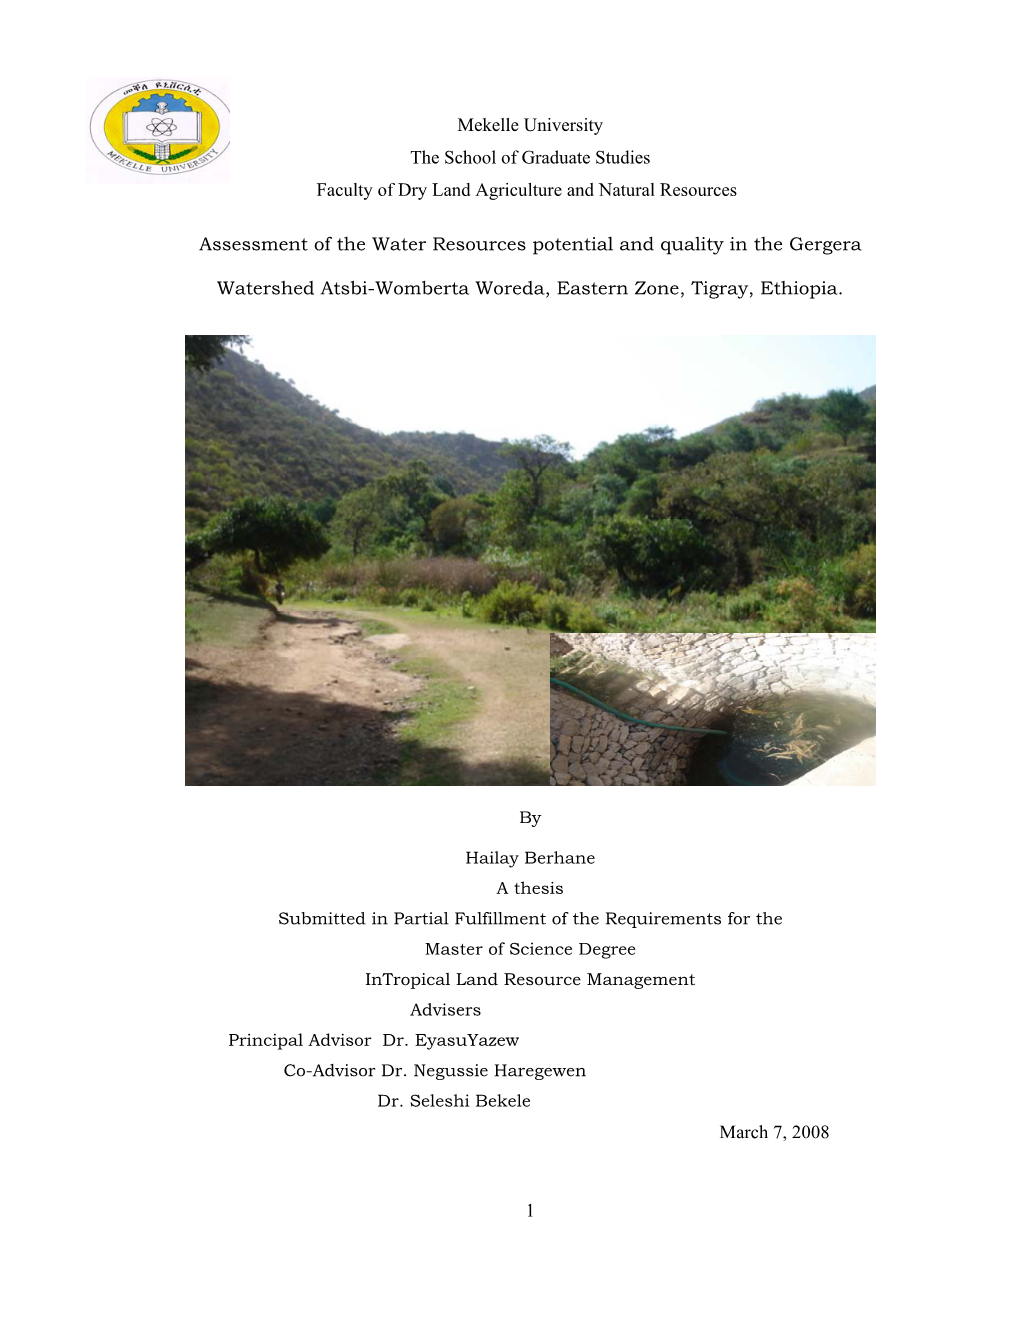 1 Mekelle University the School of Graduate Studies Faculty of Dry Land Agriculture and Natural Resources Assessment of the Wate